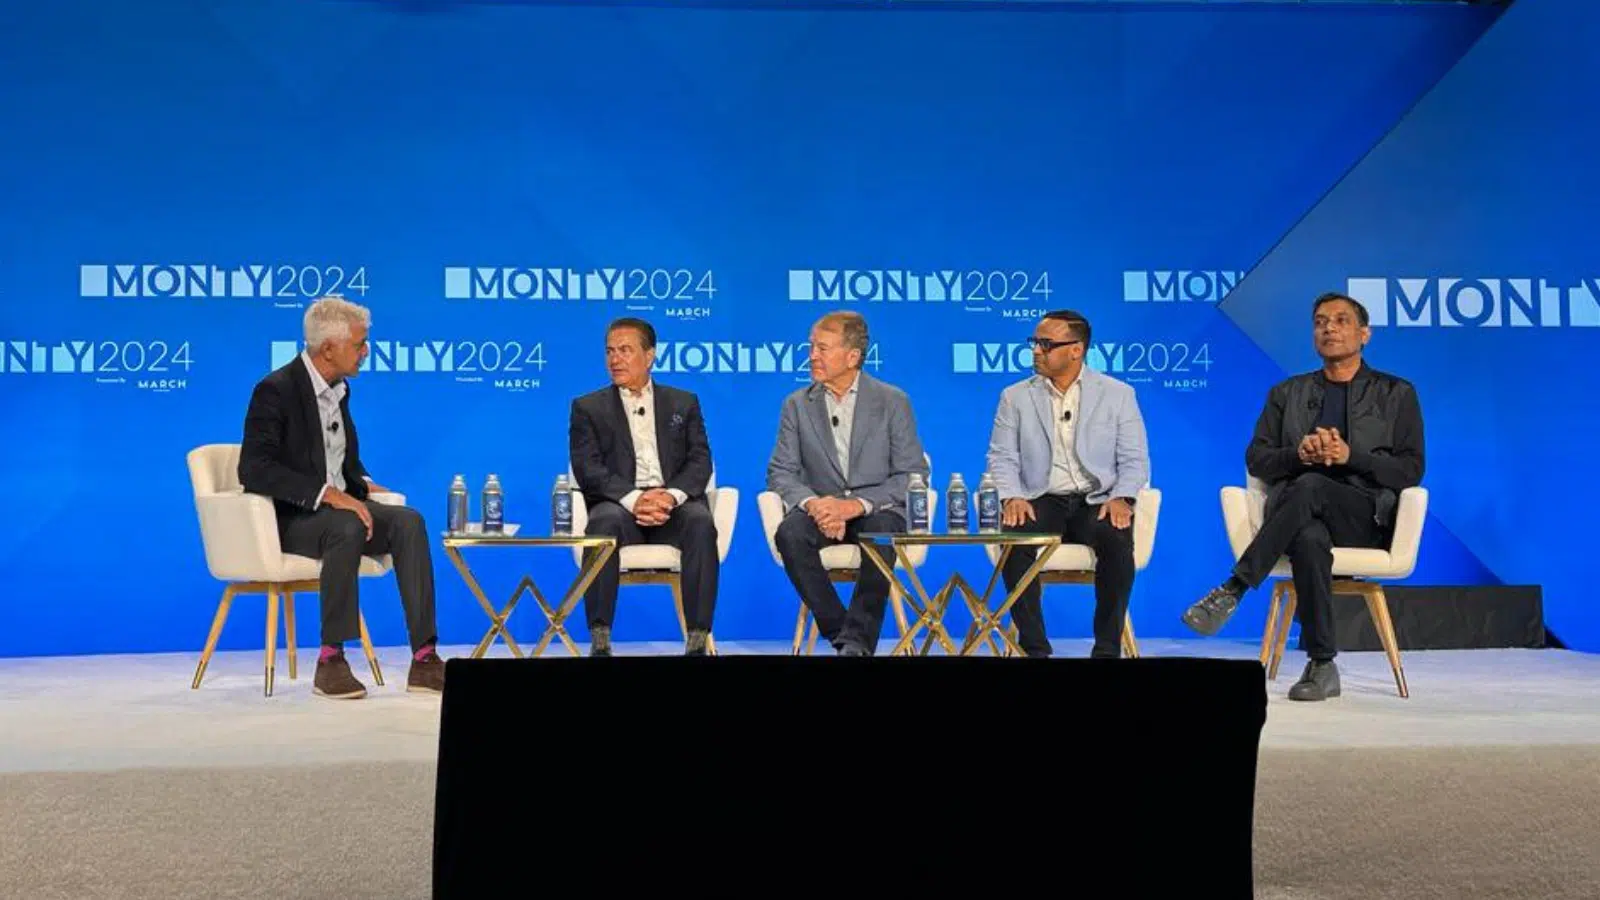 USISPF Chairman  John Chambers  and USISPF President and CEO  Dr. Mukesh Aghi , along with USISPF Board Member,  Umesh Sachdev  of  Uniphore , speak at the  Monty Summit  in Santa Monica, California